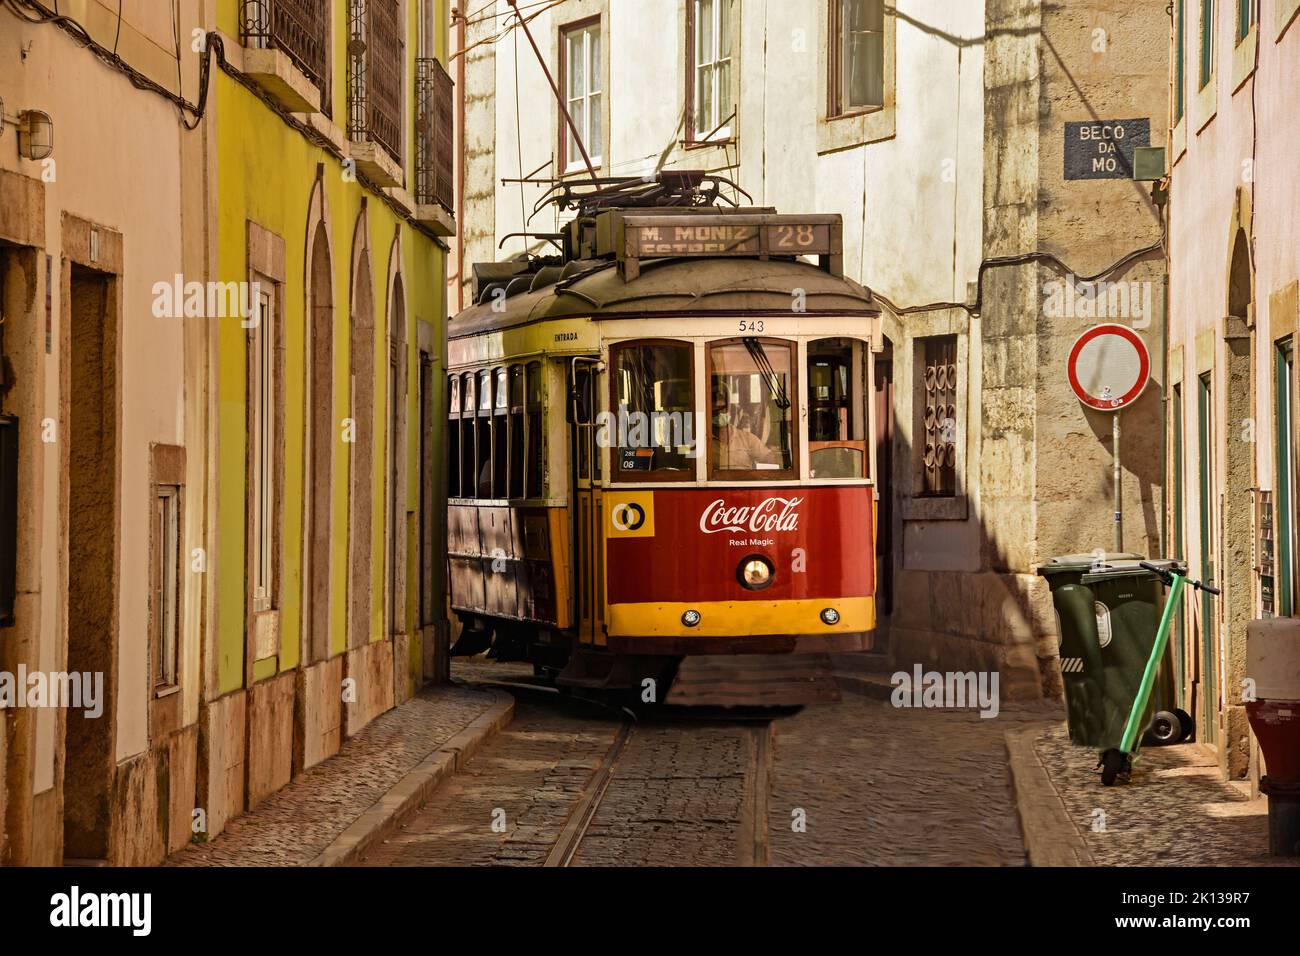 Tram on route 28 through the narrow streets of Alfama old town, Lisbon, Portugal, Europe Stock Photo